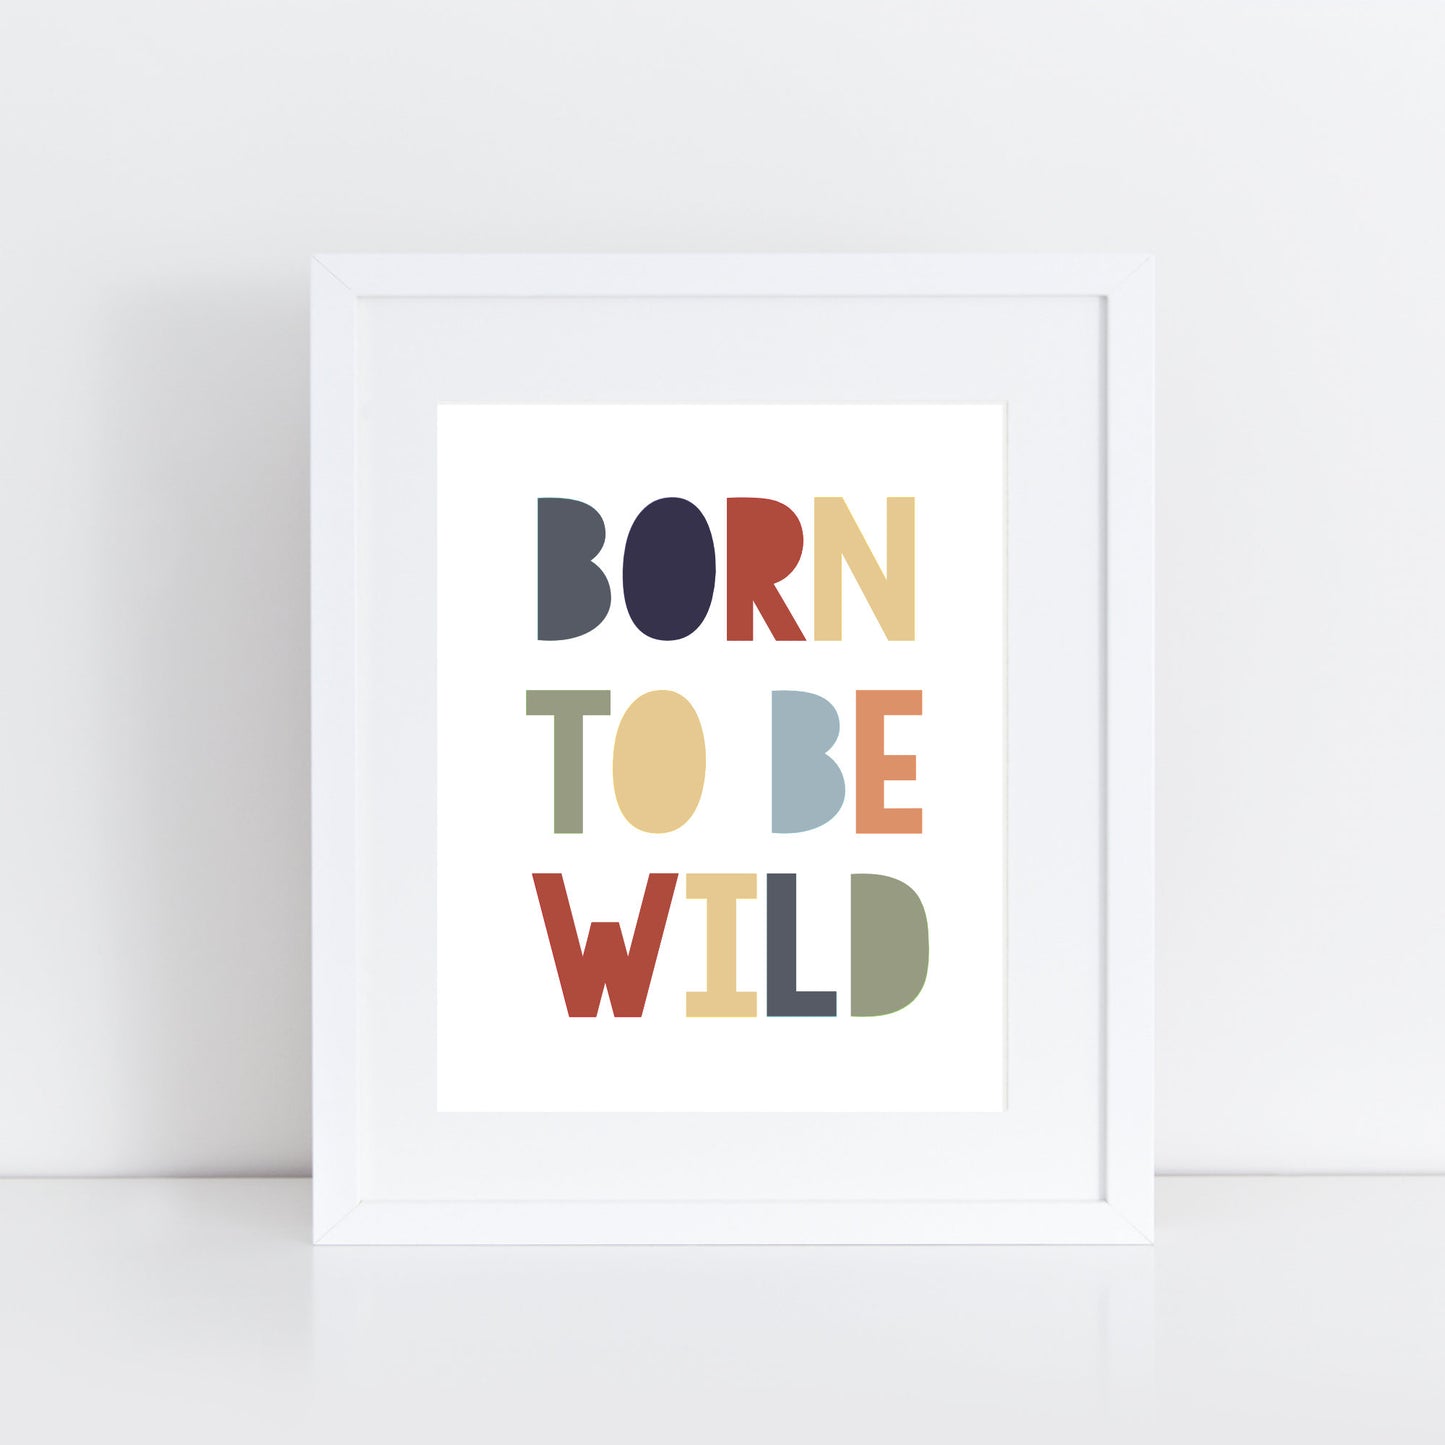 BORN TO BE WILD print in beautiful earthy tones framed